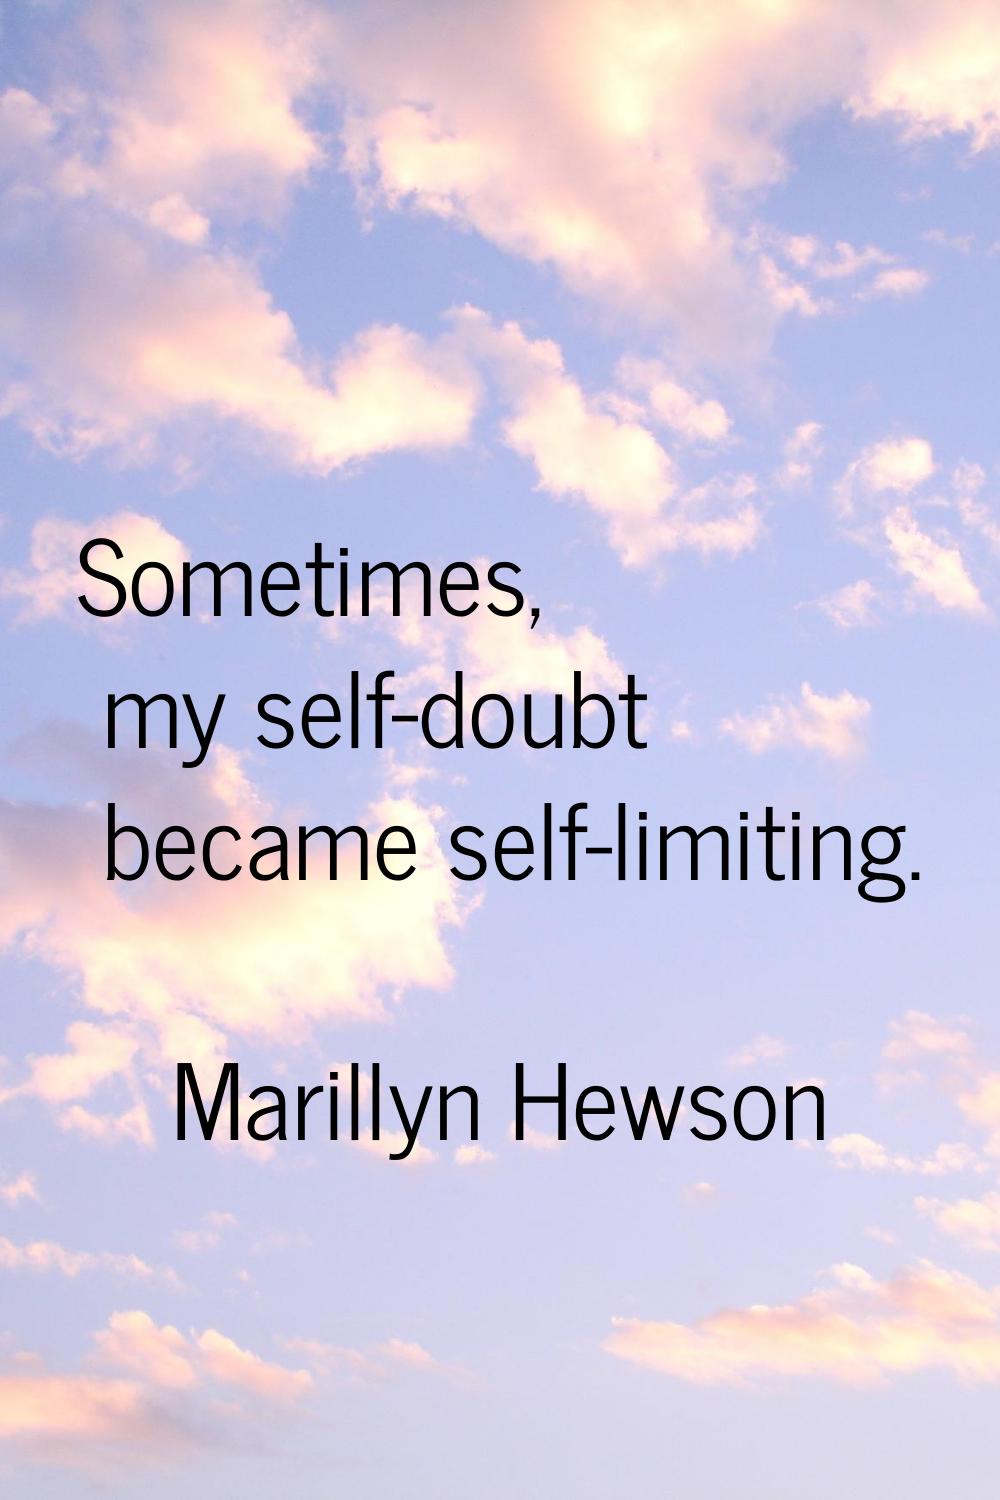 Sometimes, my self-doubt became self-limiting.